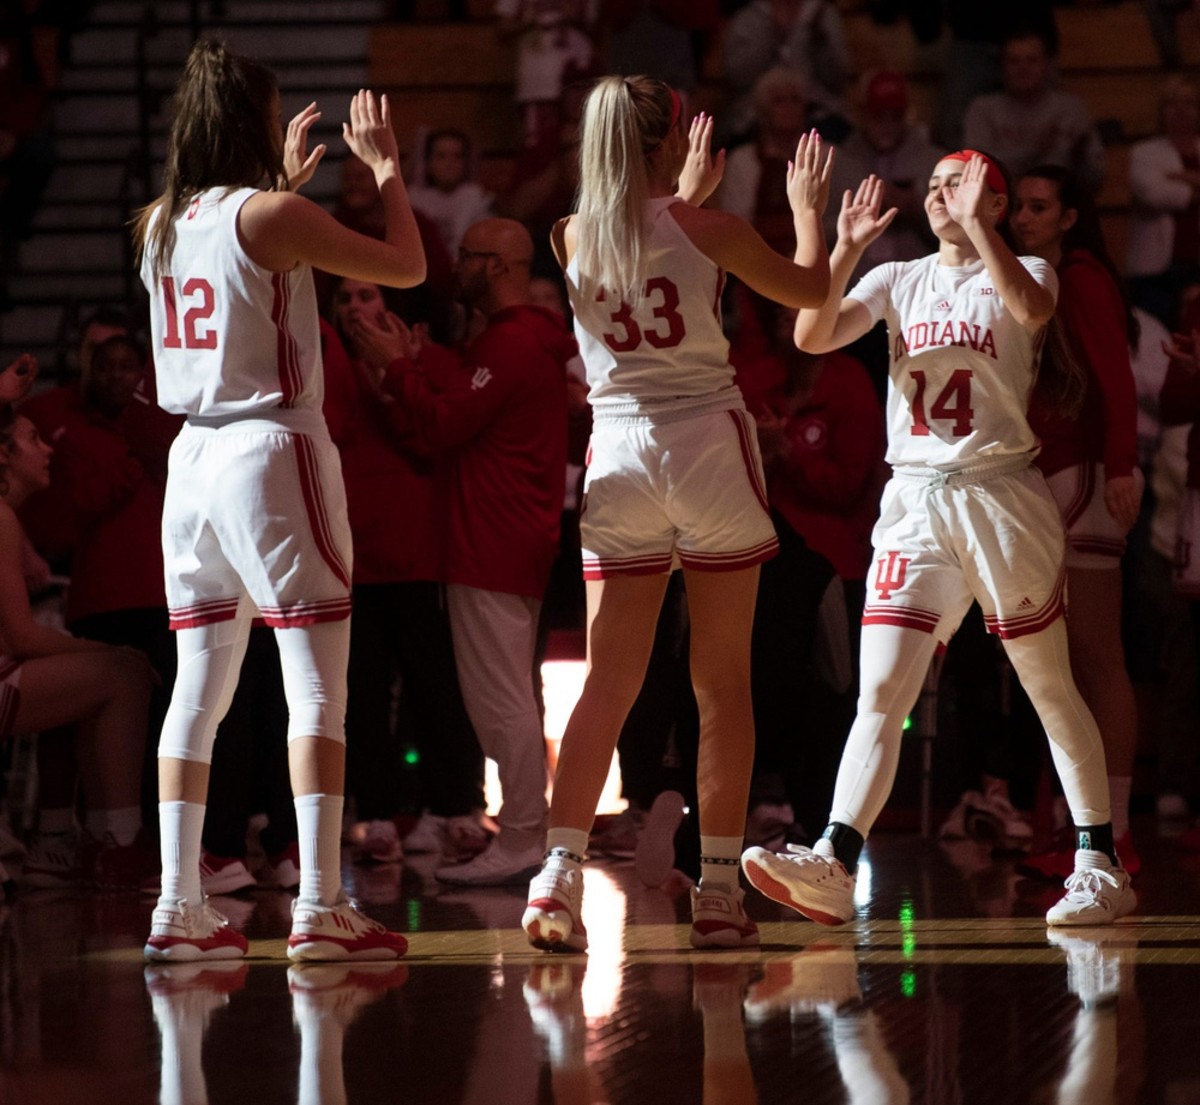 Indiana's Sara Scalia (14) is introduced before the first half of the Indiana versus Illinois women's basketball game at Simon Skjodt Assembly Hall on Sunday, Dec. 4, 2022.